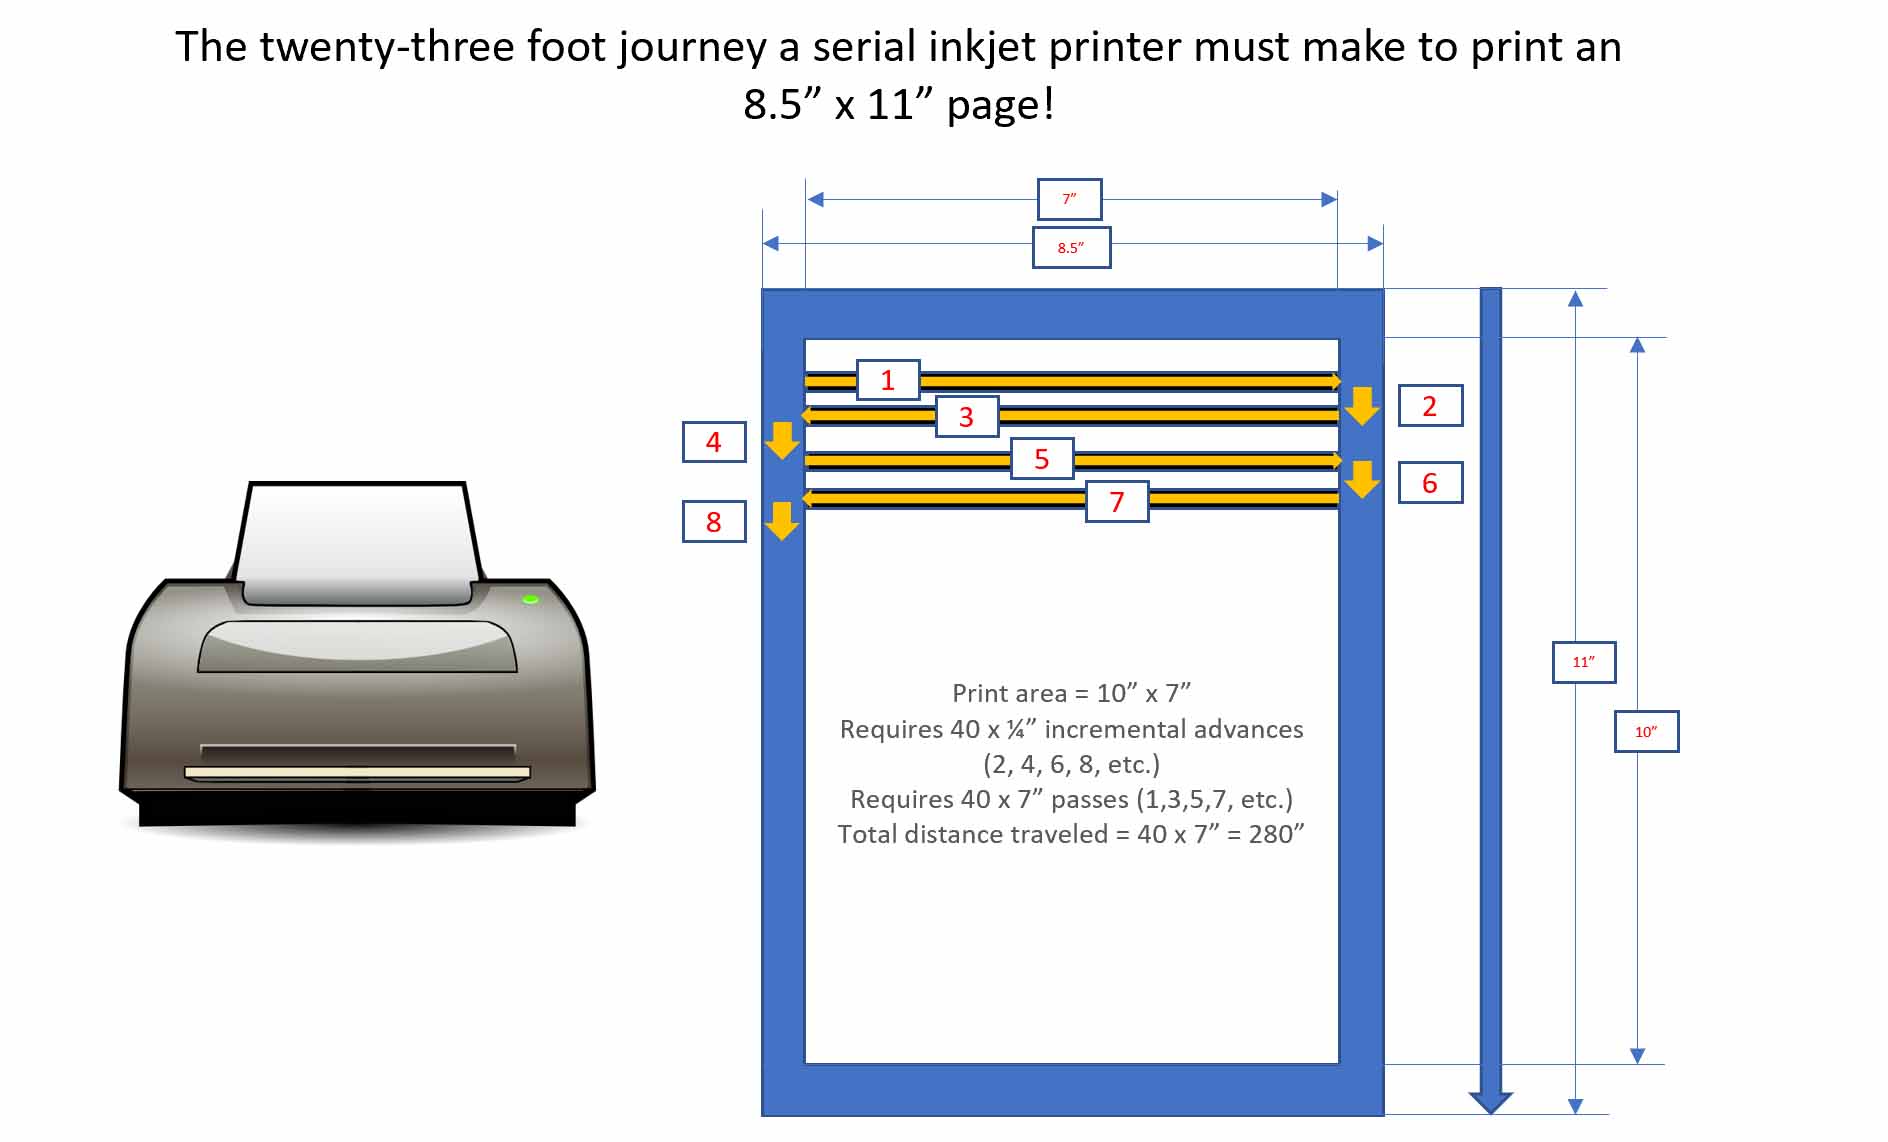 23 foot journey for a serial inkjet printer to print one page